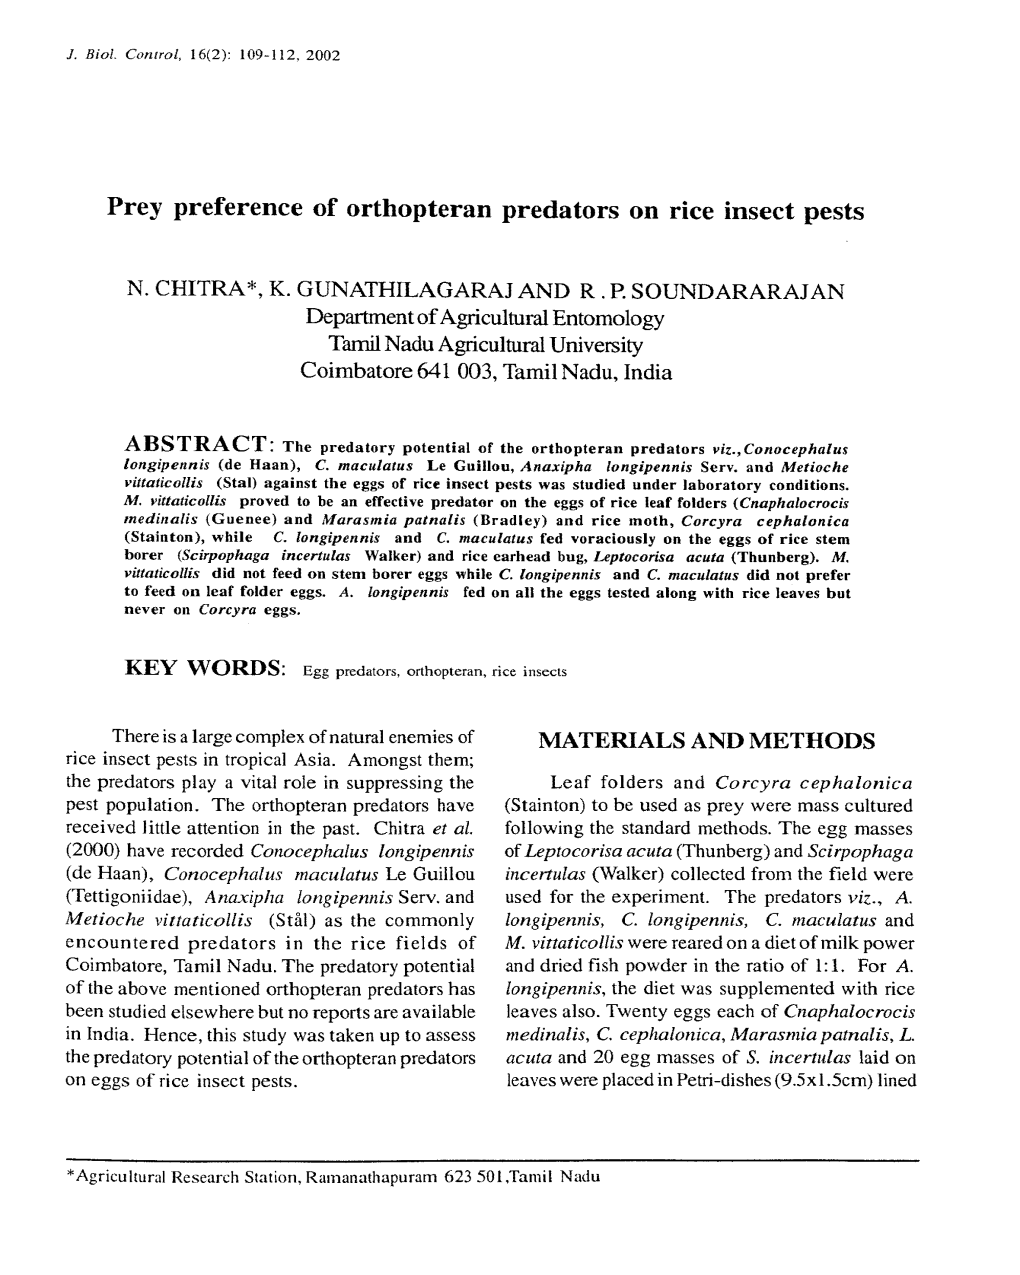 Prey Preference of Orthopteran Predators on Rice Insect Pests